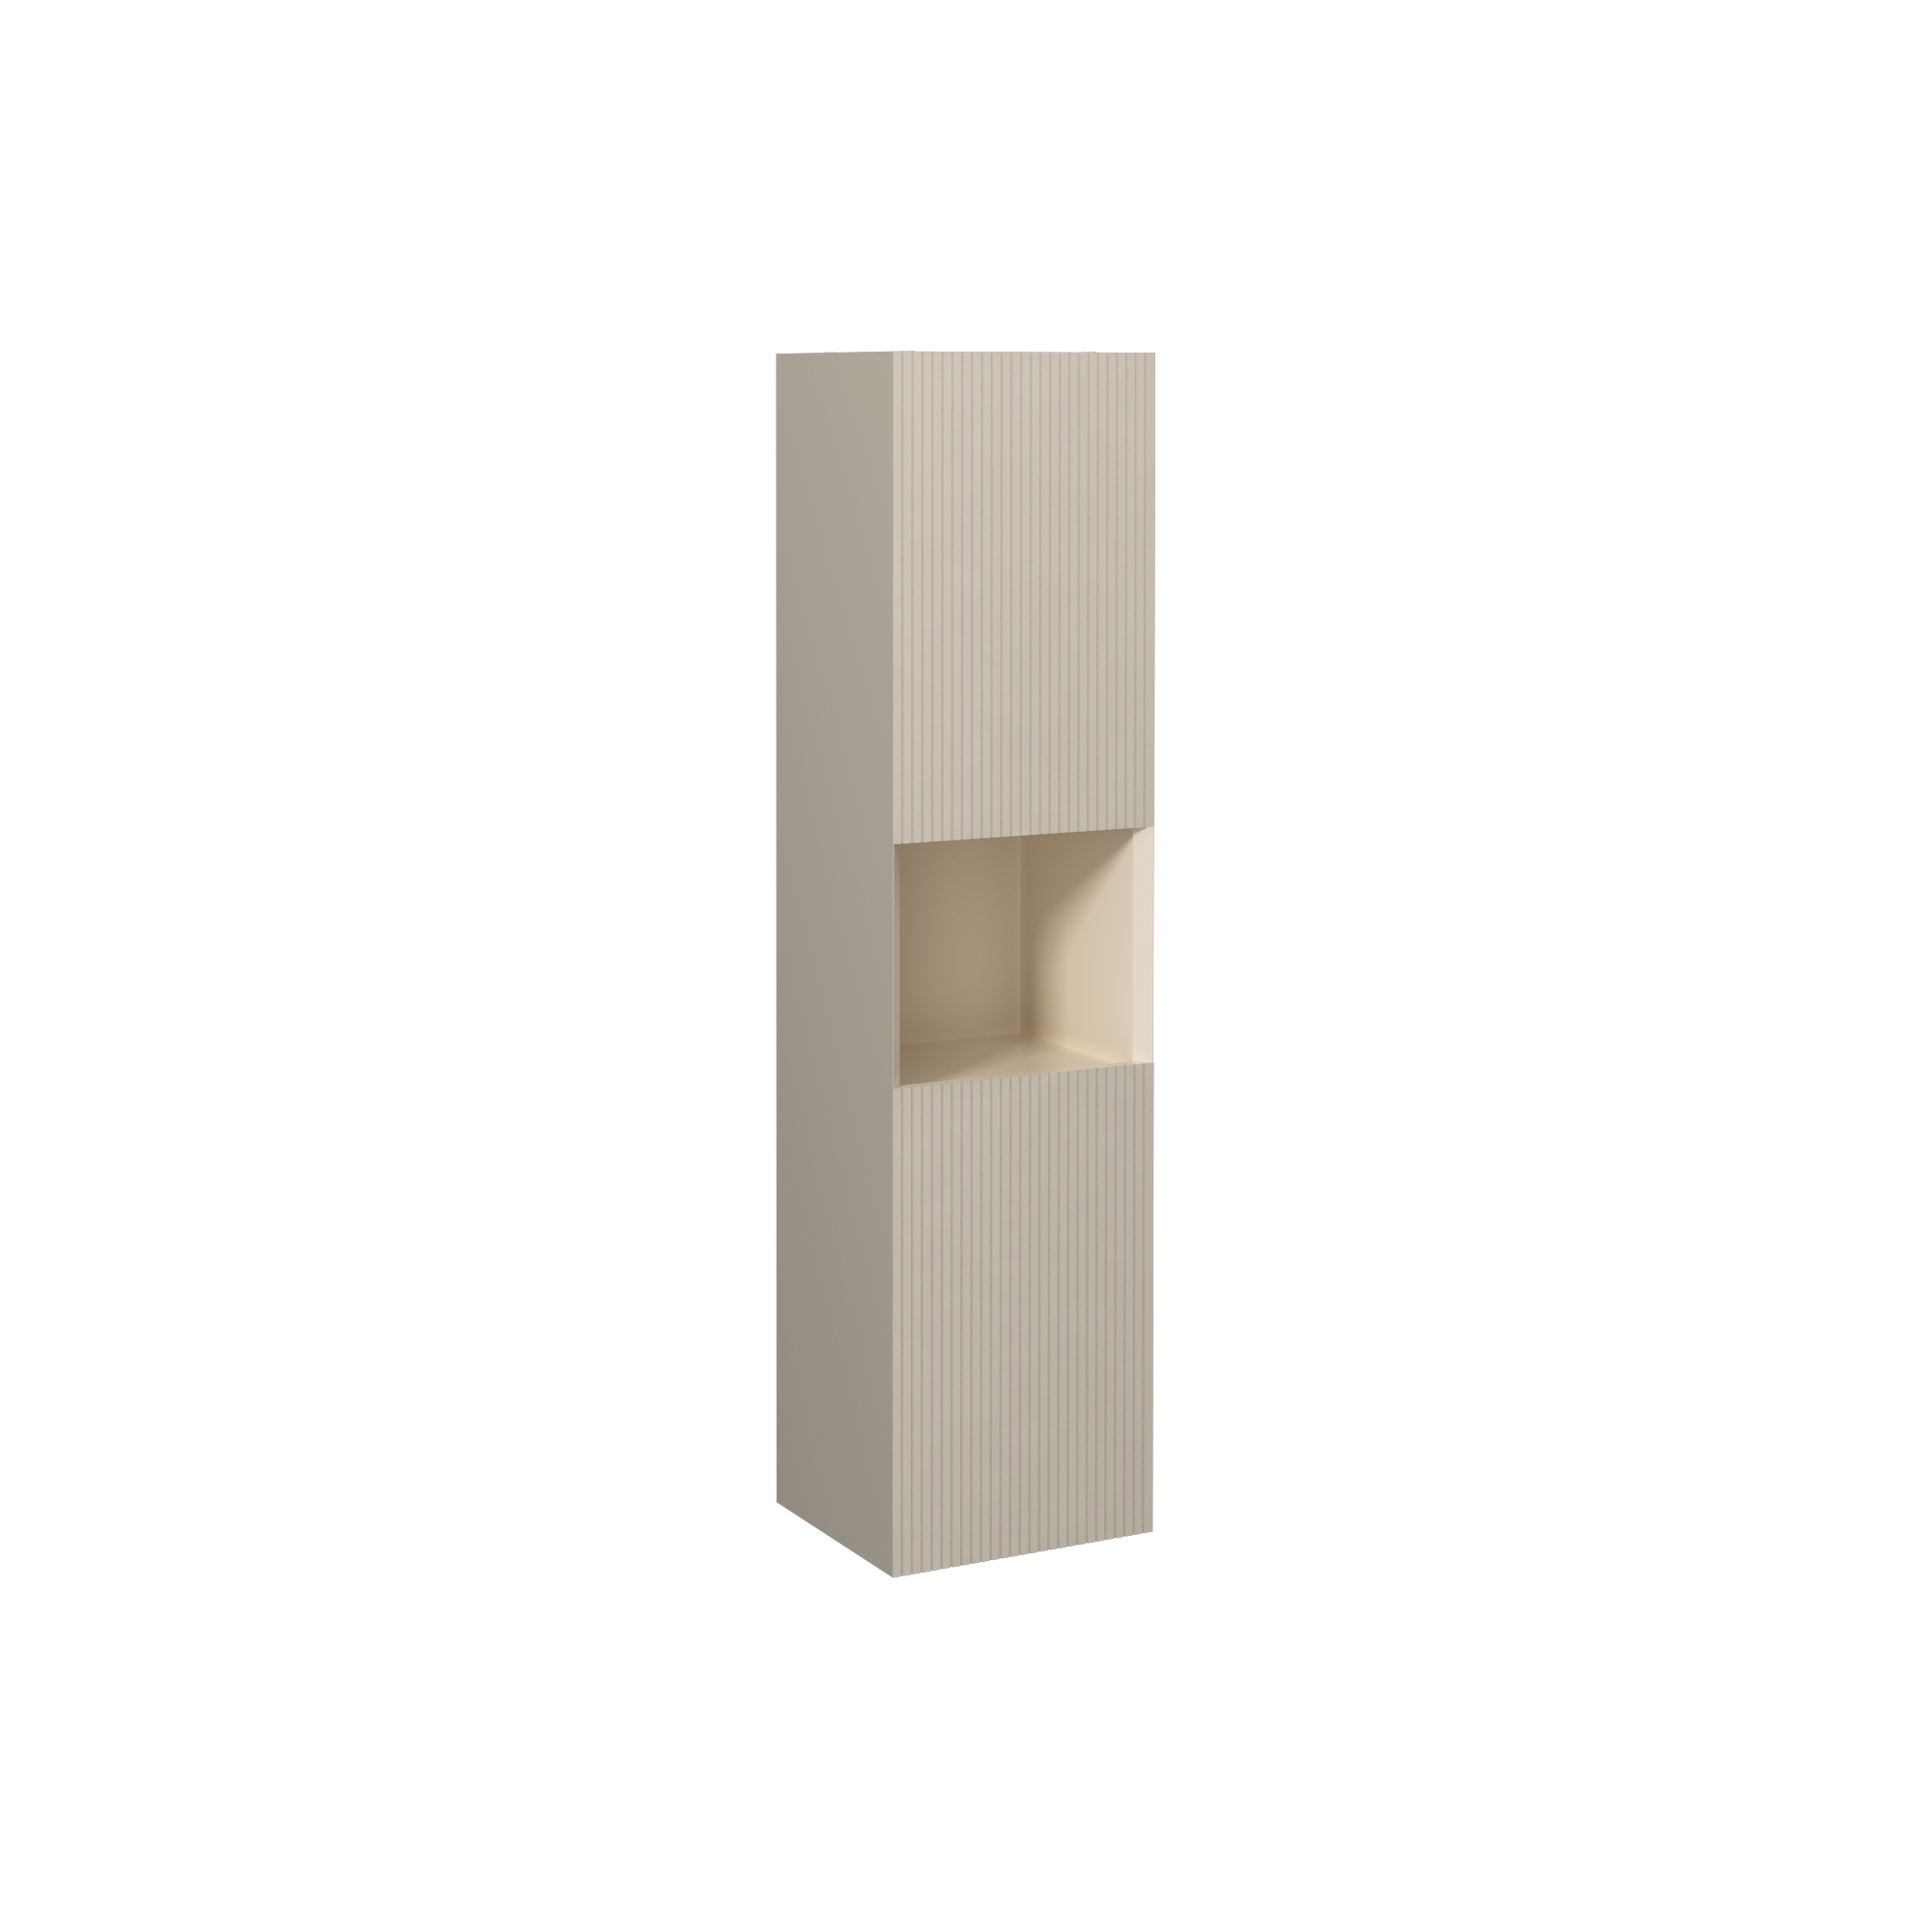 Infinity Tall Cabinet, Cream Right 14"